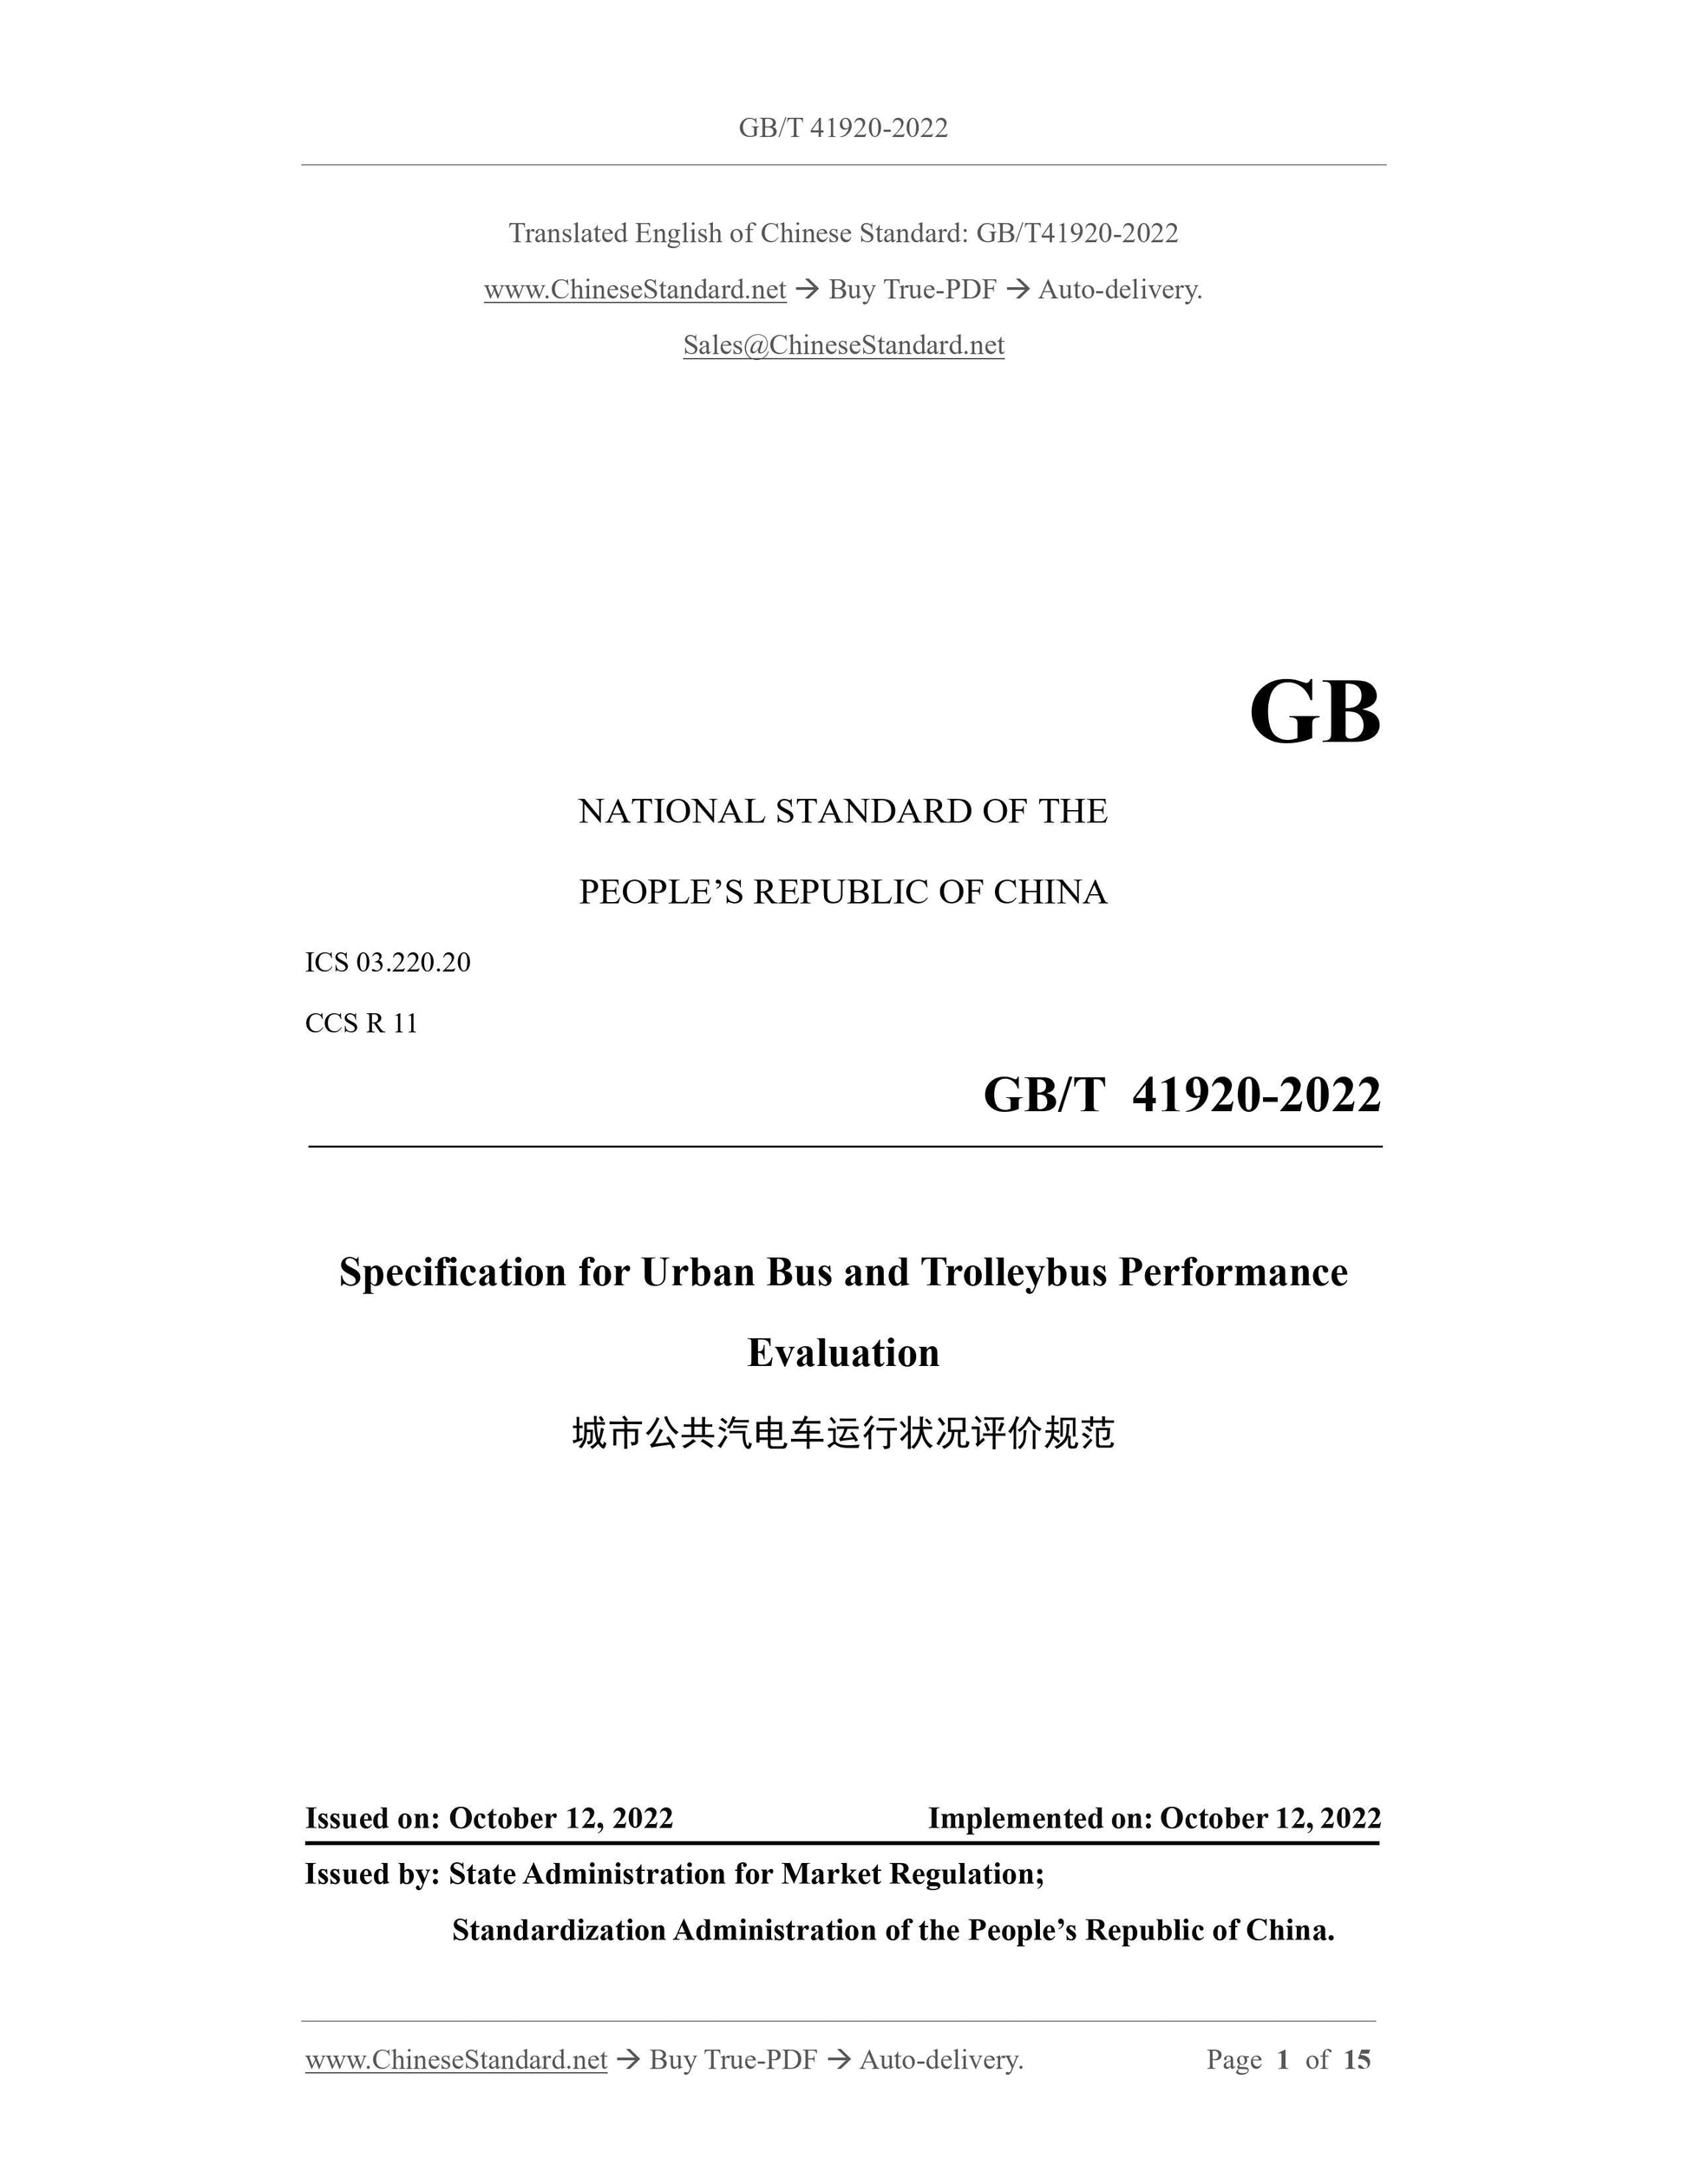 GB/T 41920-2022 Page 1